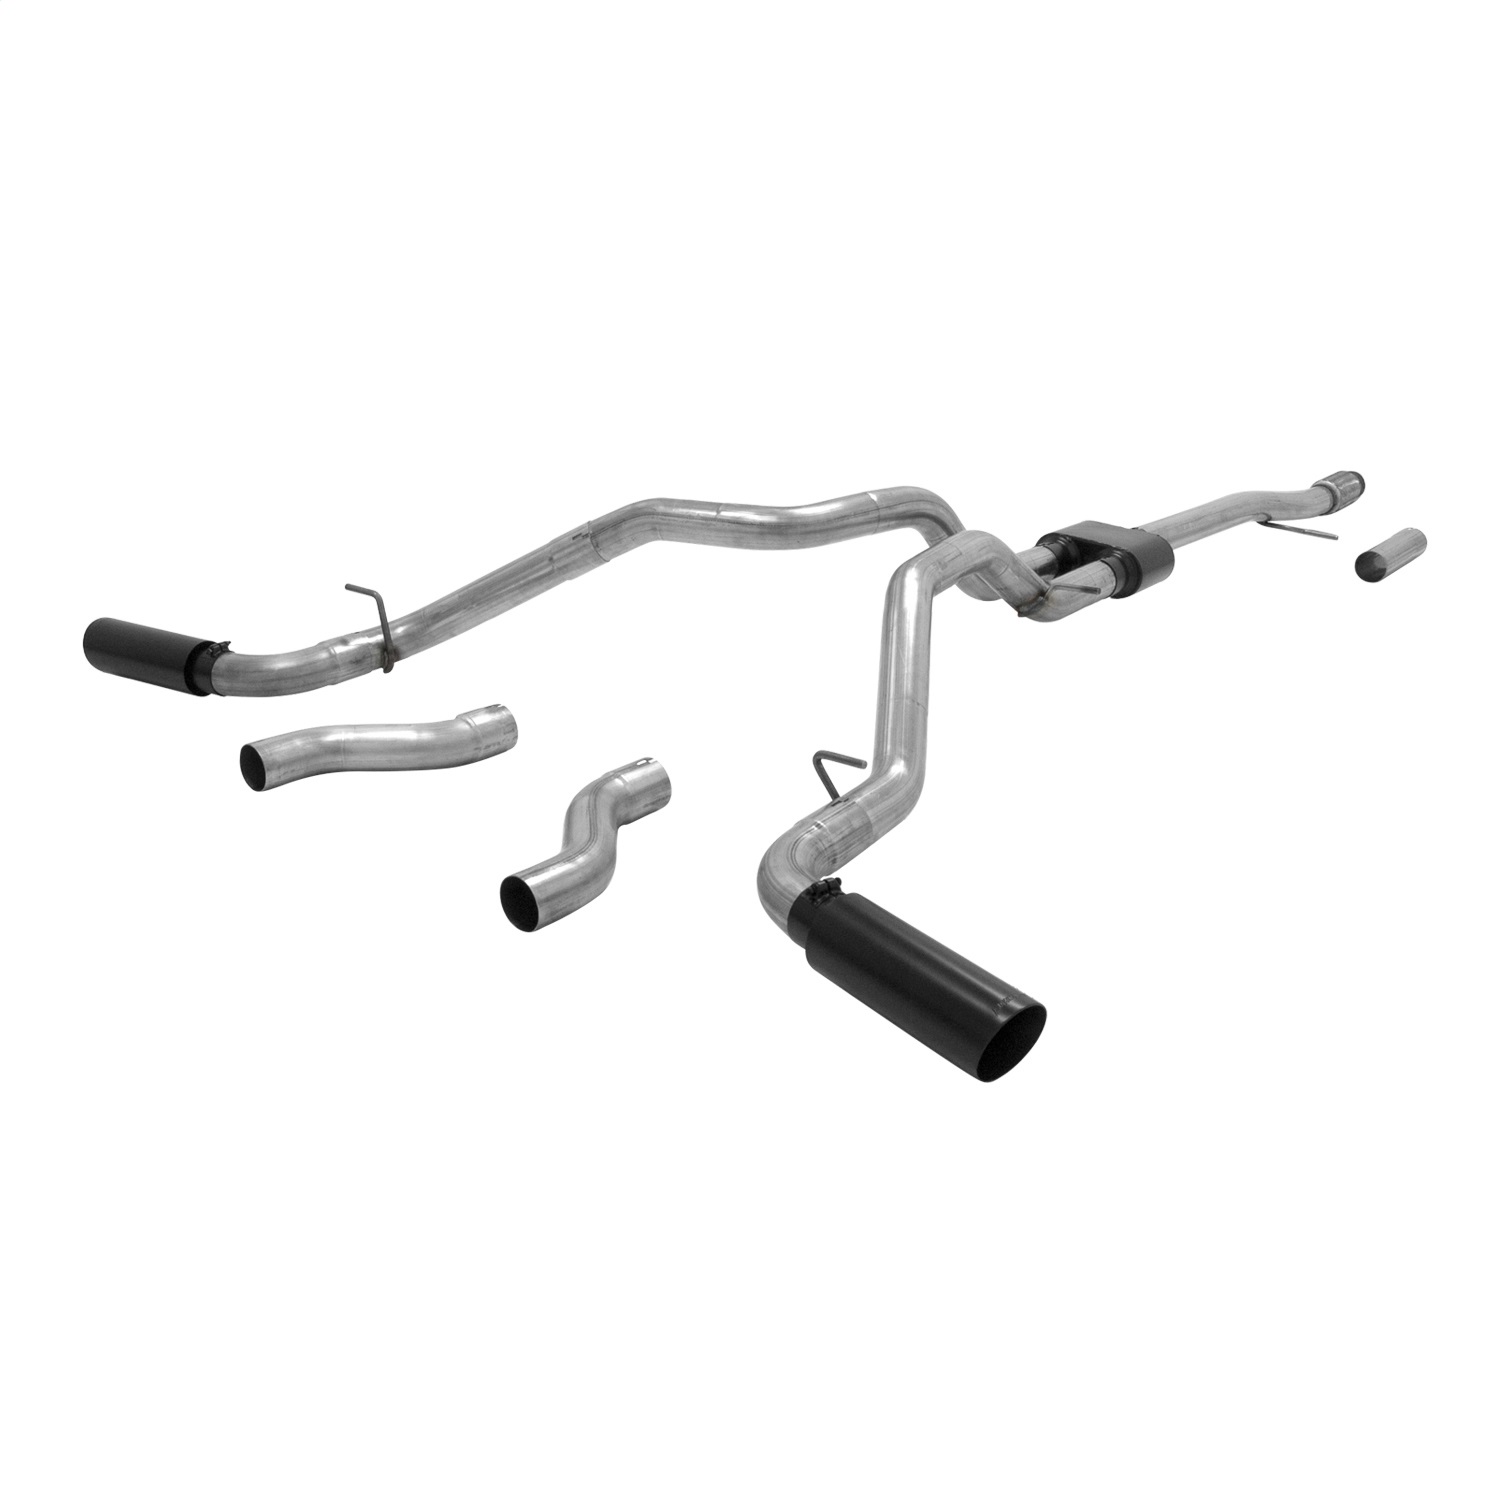 Flowmaster Flowmaster 817689 Outlaw Series Cat Back Exhaust System